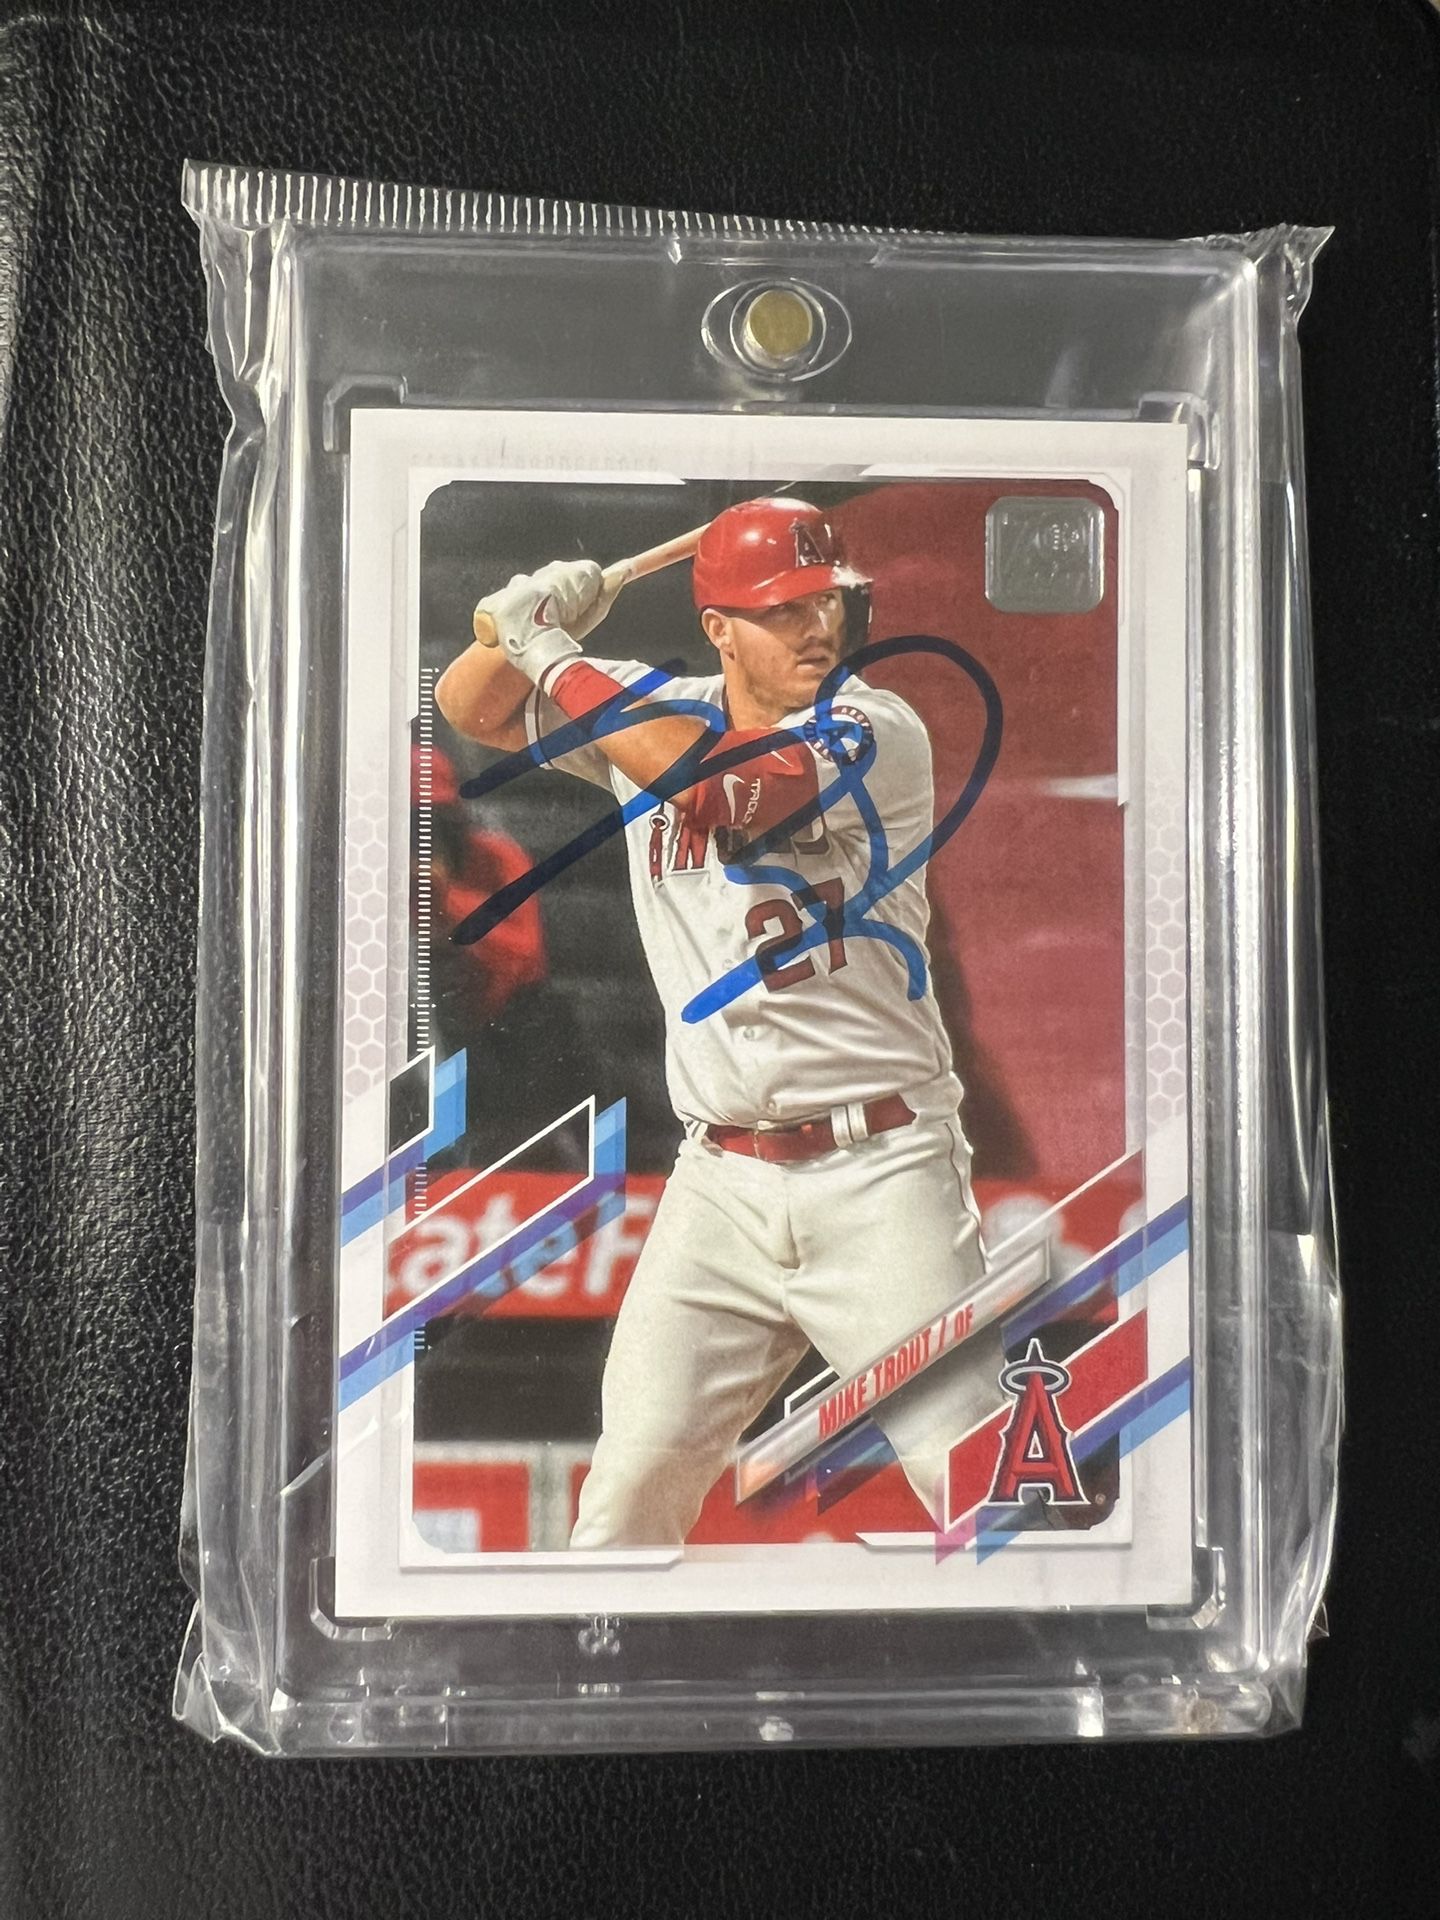 $90 Each!! 2 Total!! Mike Trout Autographs For Sale!! Signed Baseball Cards. No COA. On-Card. In-Person Auto. 